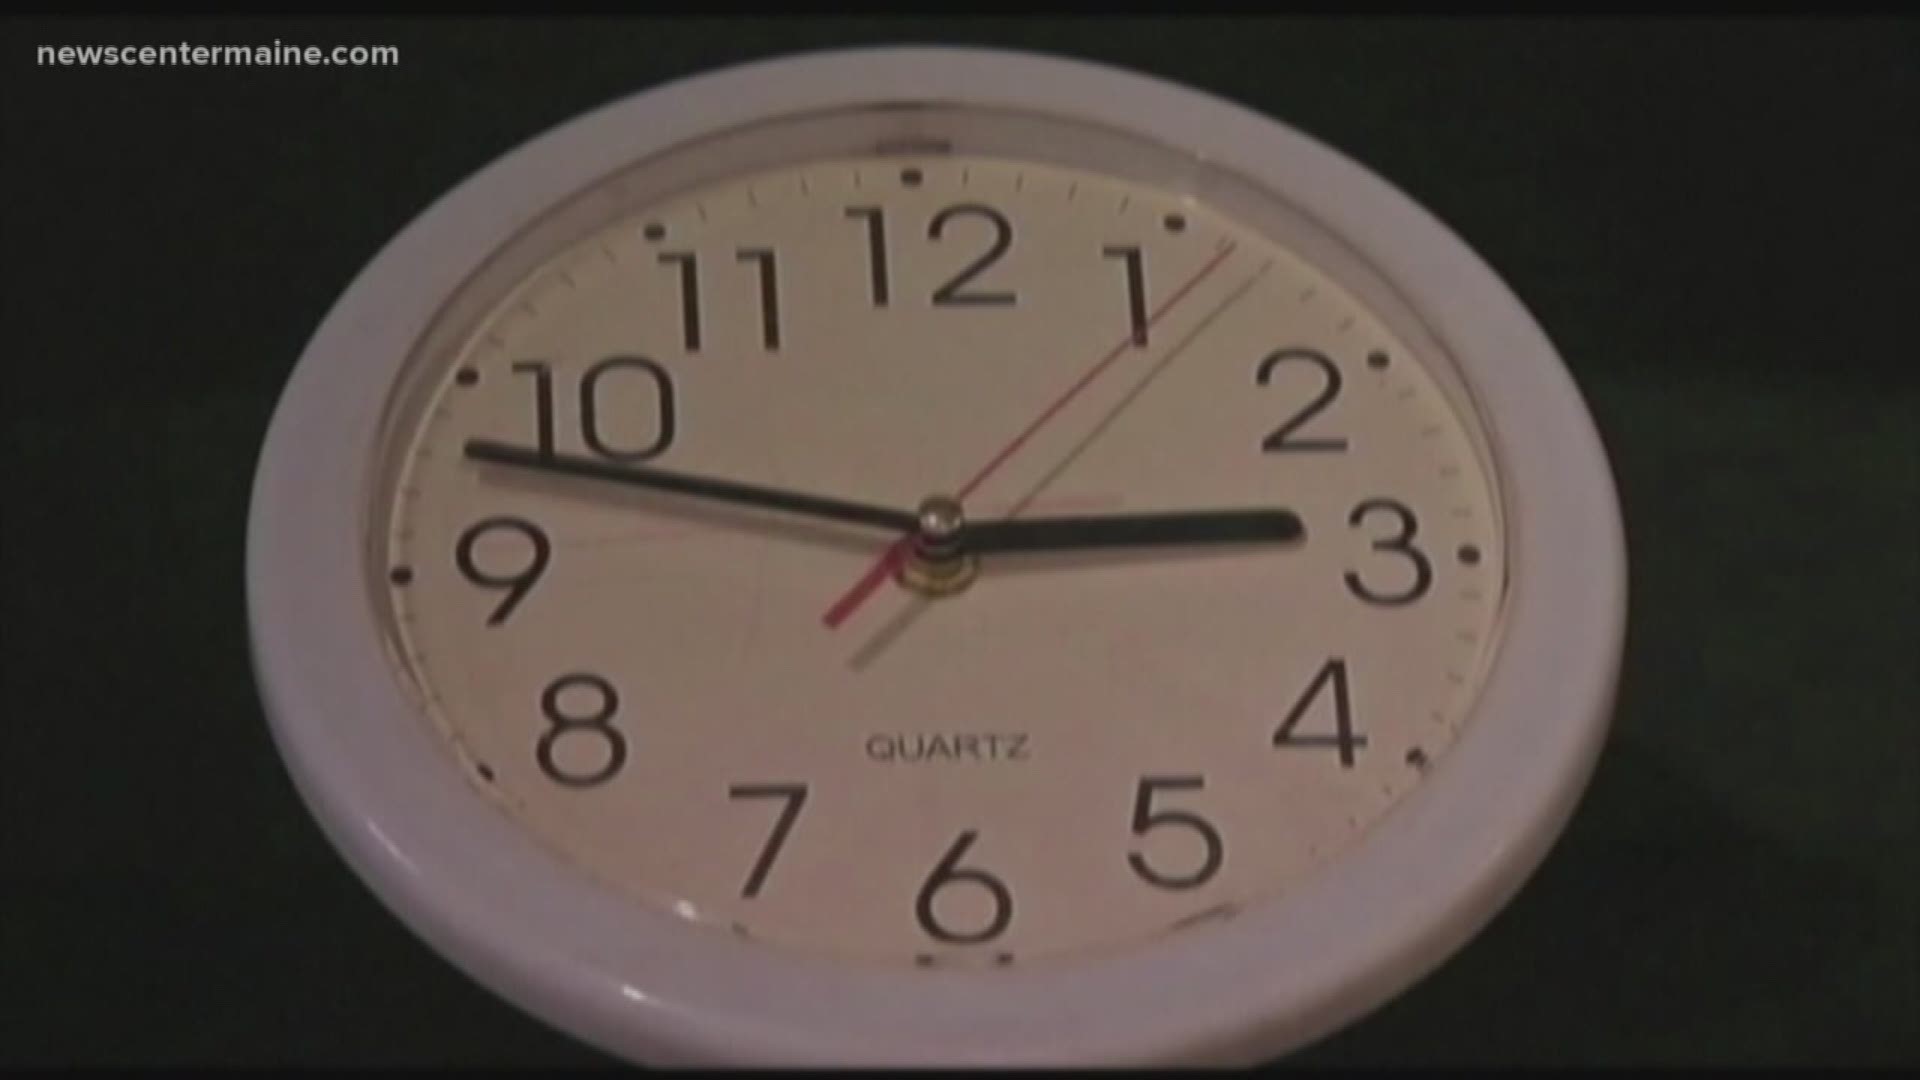 Maine has passed a new law that would allow the state to stay on Eastern Daylight Time all year long, but there's a catch. Congress would have to pass a law to allow it and every state in the Eastern time zone and Washington D.C. would have to also agree to observe it.